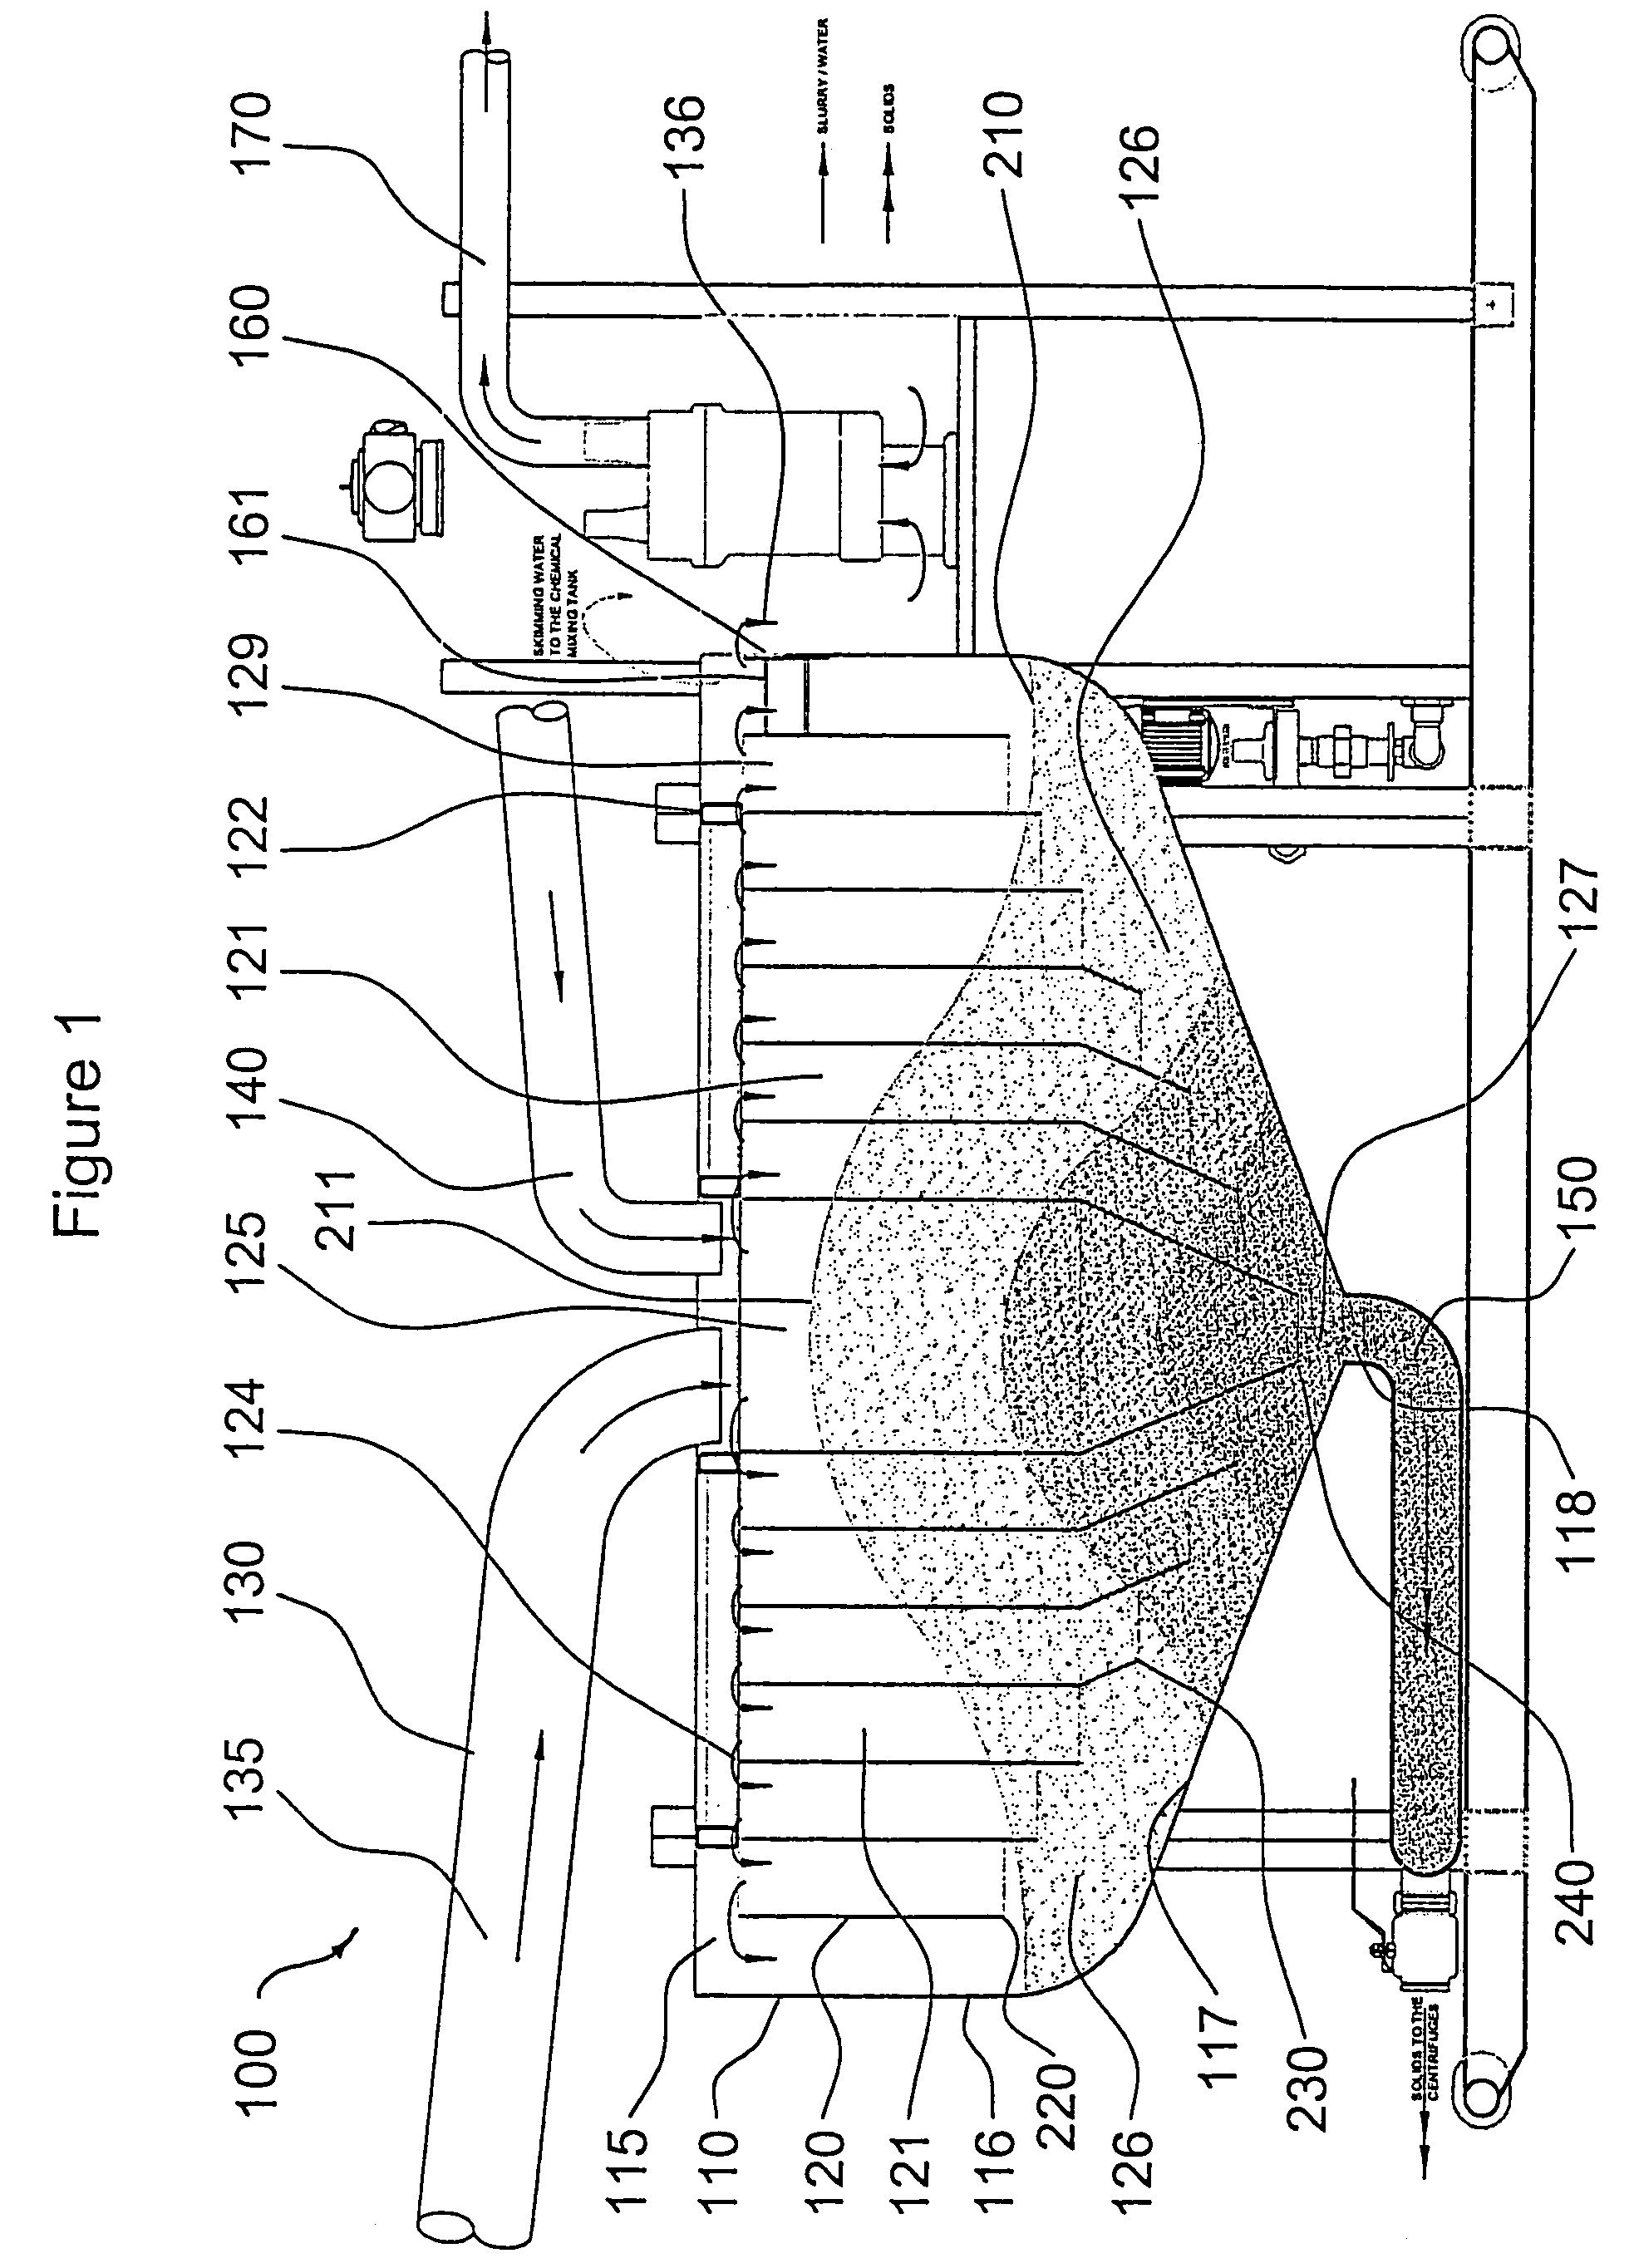 Apparatus and system for concentrating slurry solids